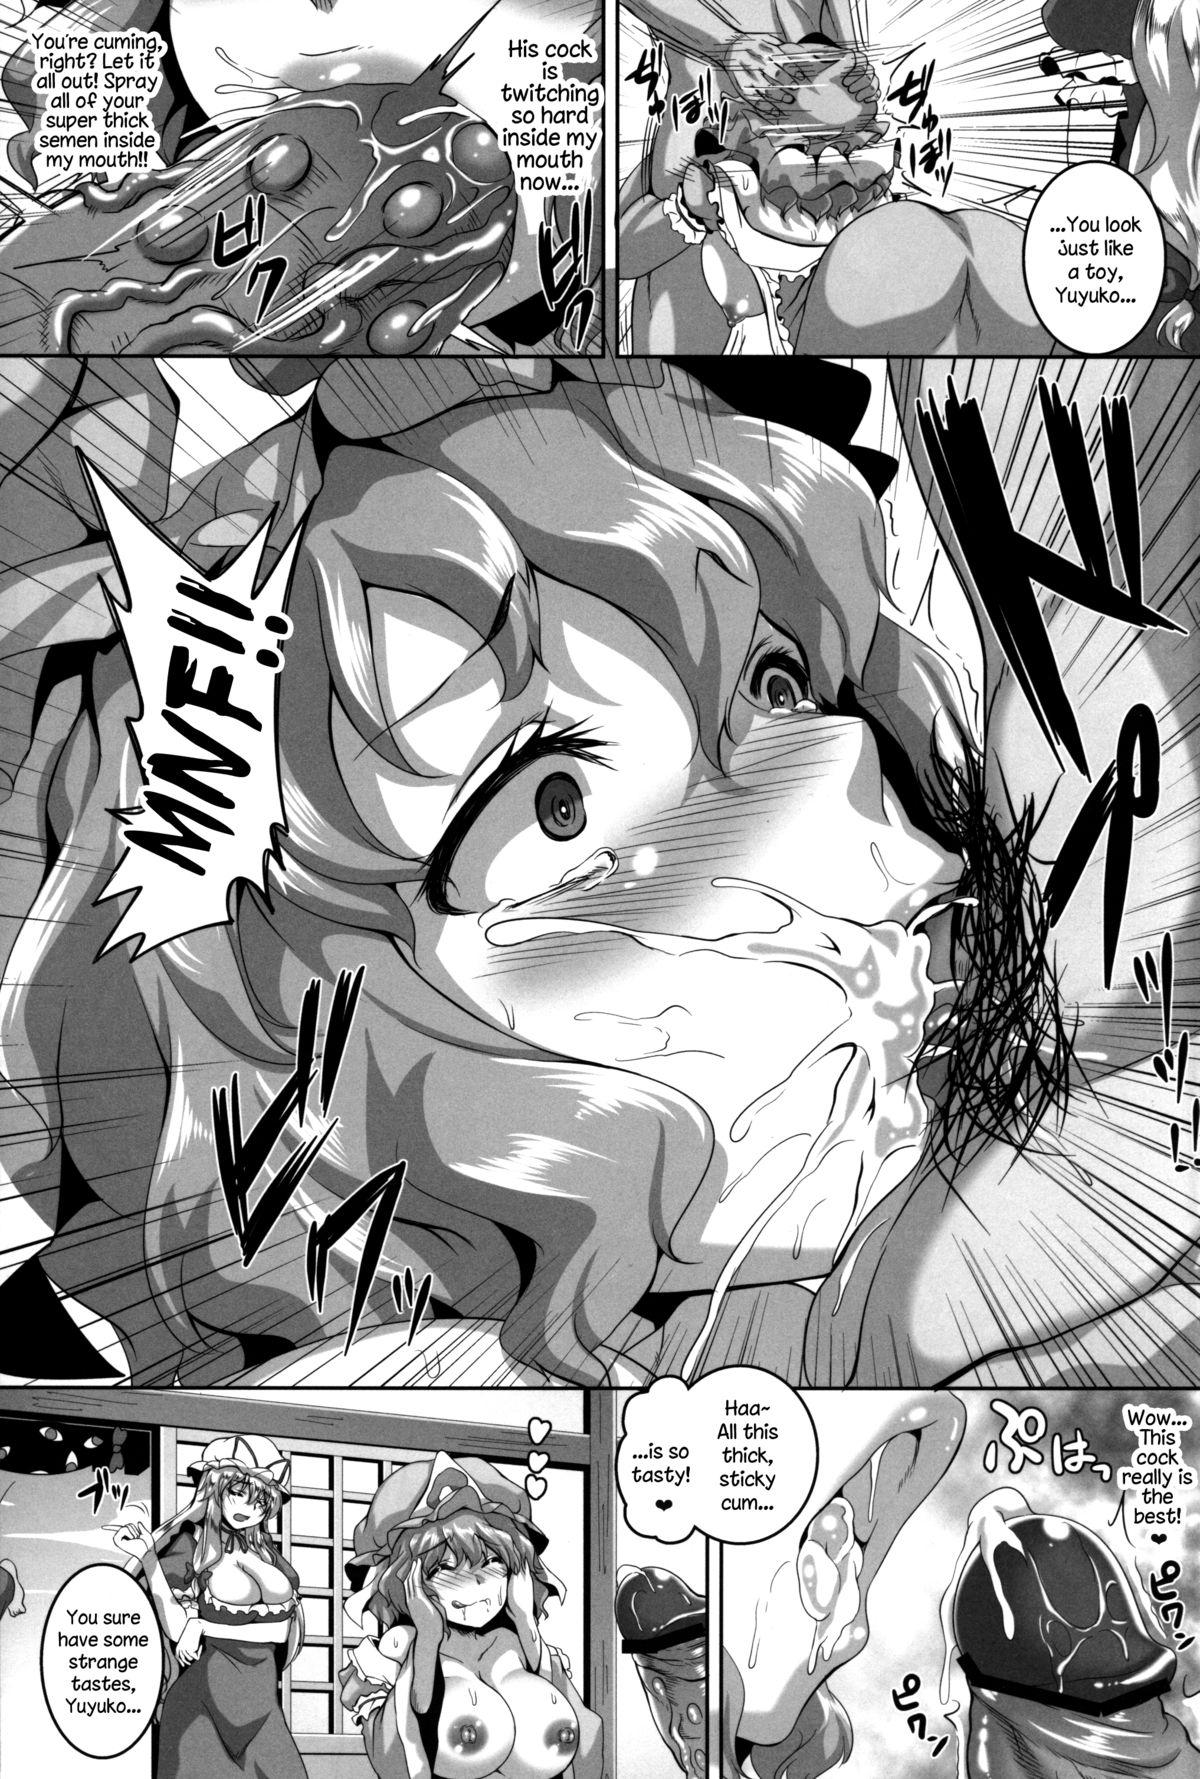 Best Blowjobs Nymphomaniac Games - Touhou project Eating - Page 6